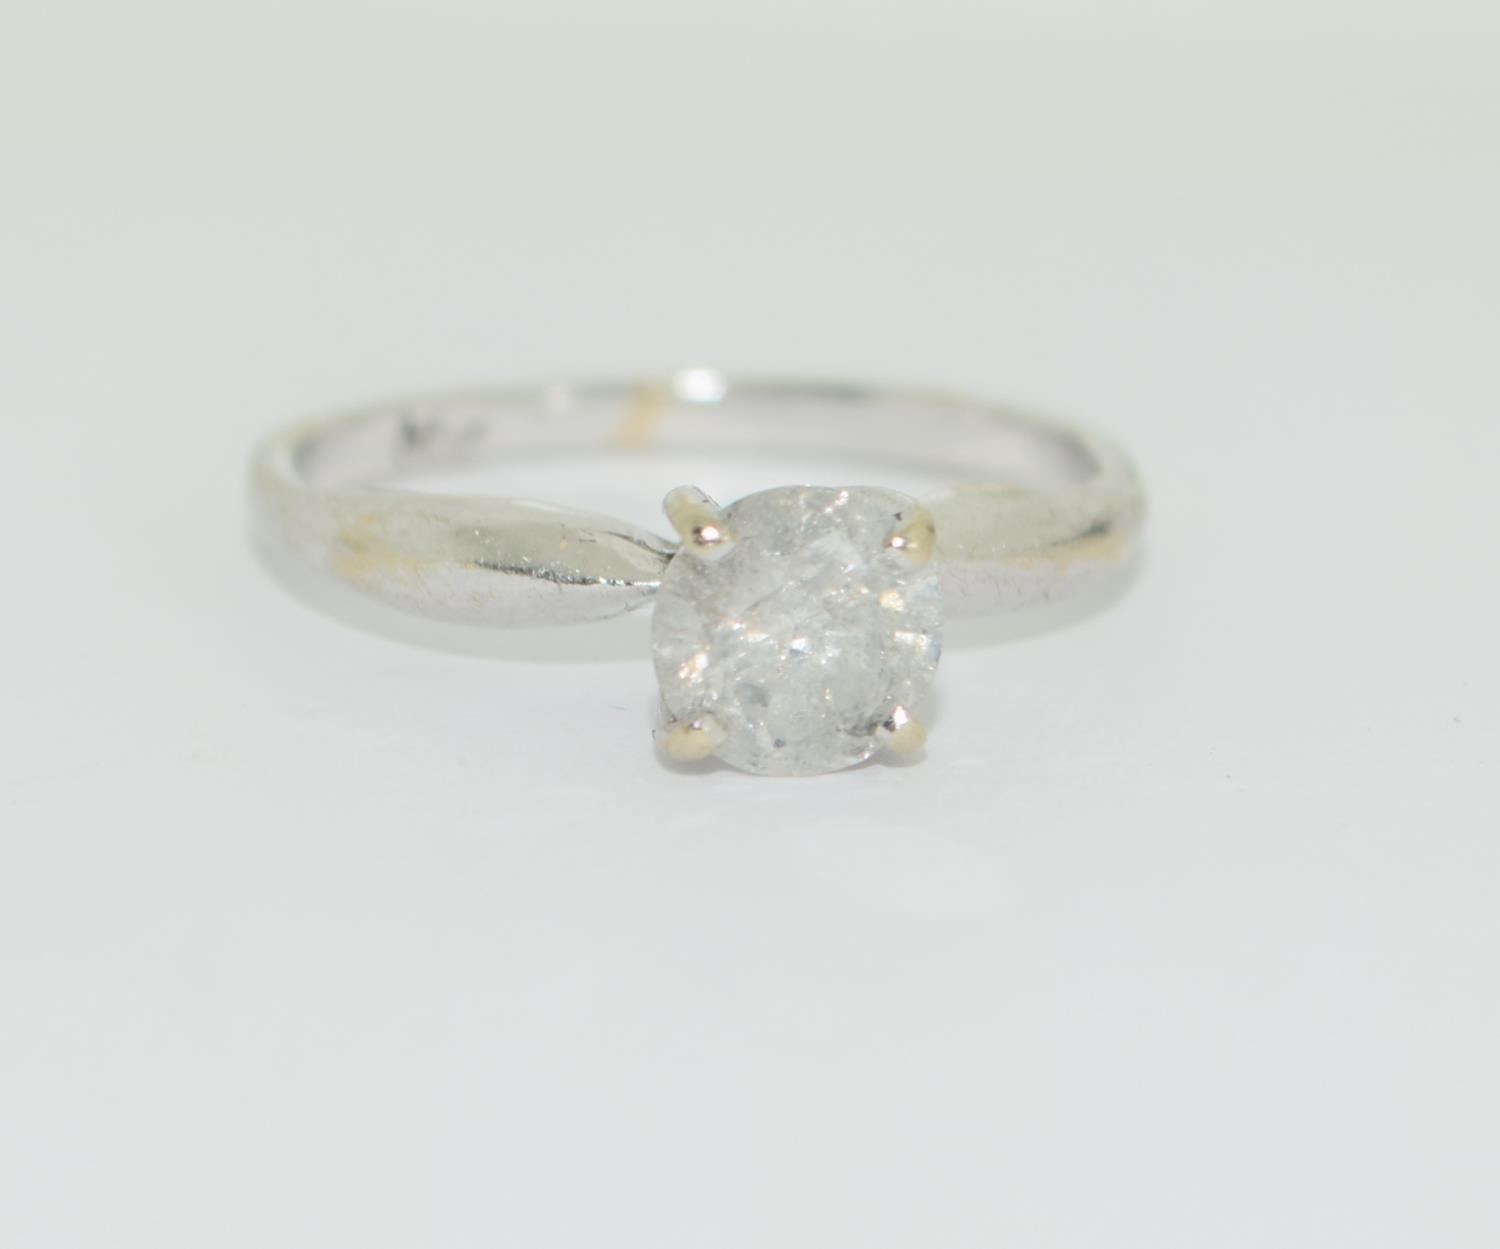 9ct white gold ladies diamond solitaire ring approx 85 points size M - Image 5 of 7